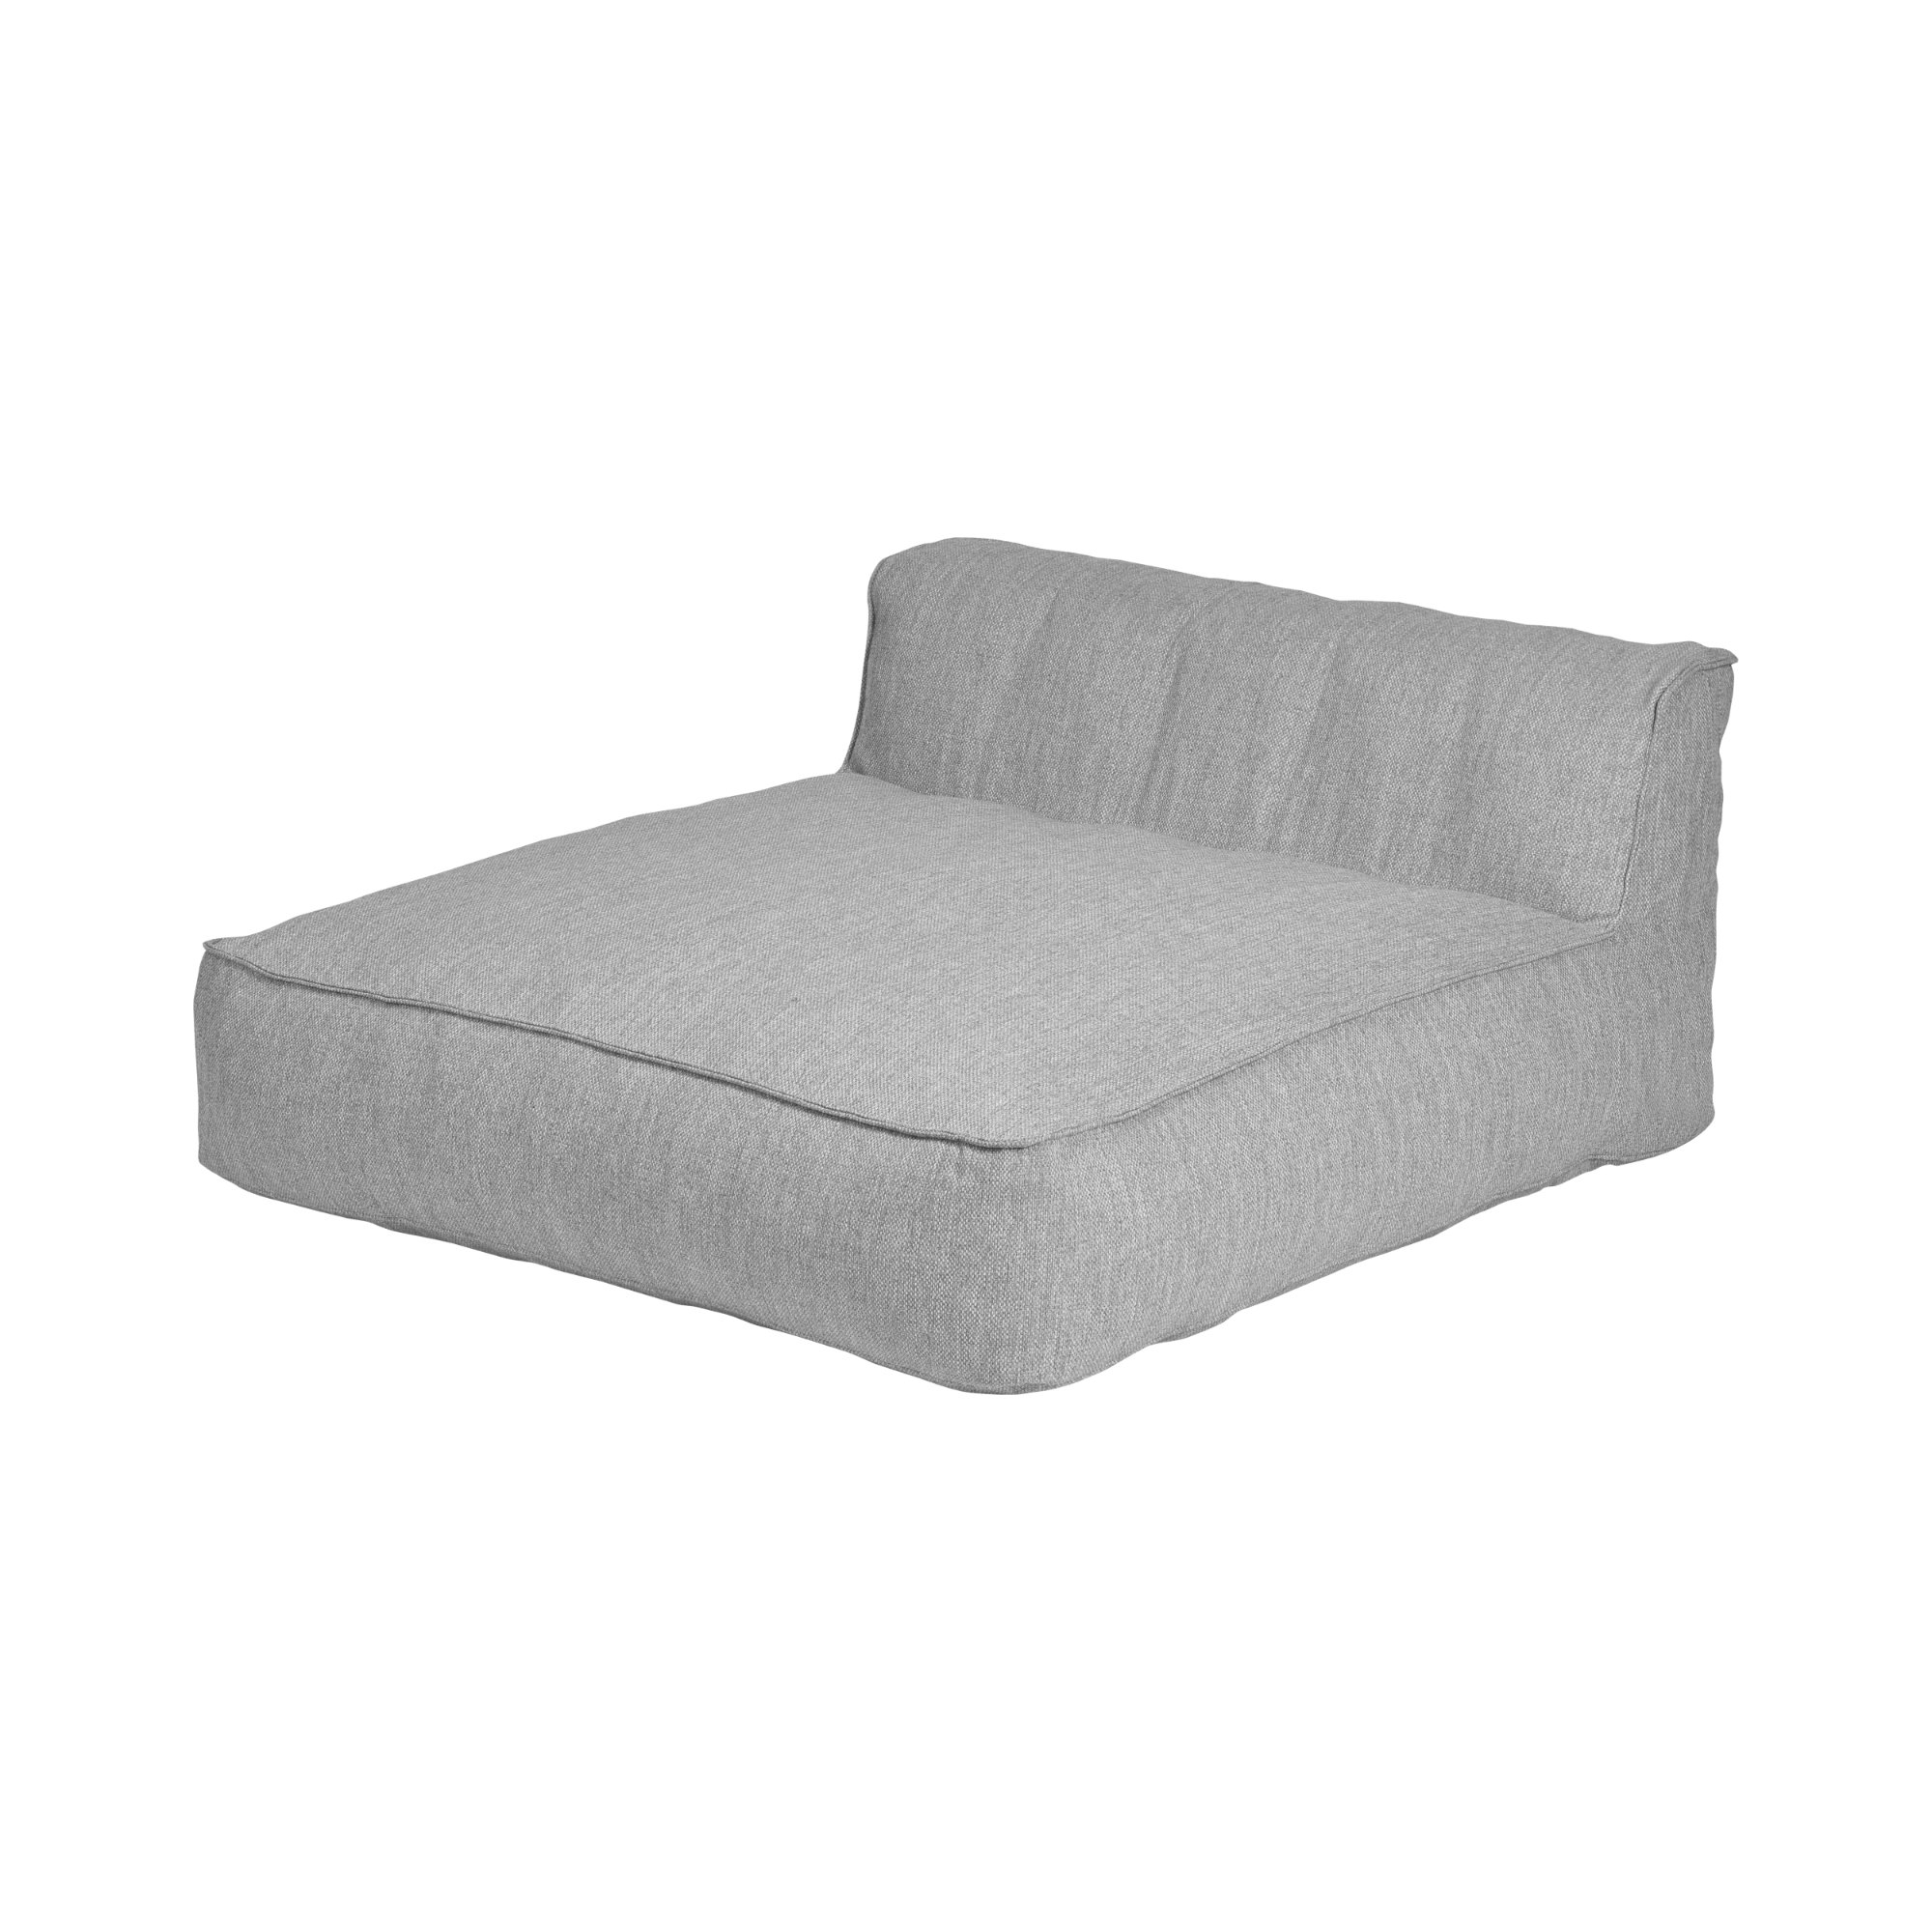 BLOMUS // GROW - OUTDOOR 2-SEATER CHAISE LONGUE | CLOUD